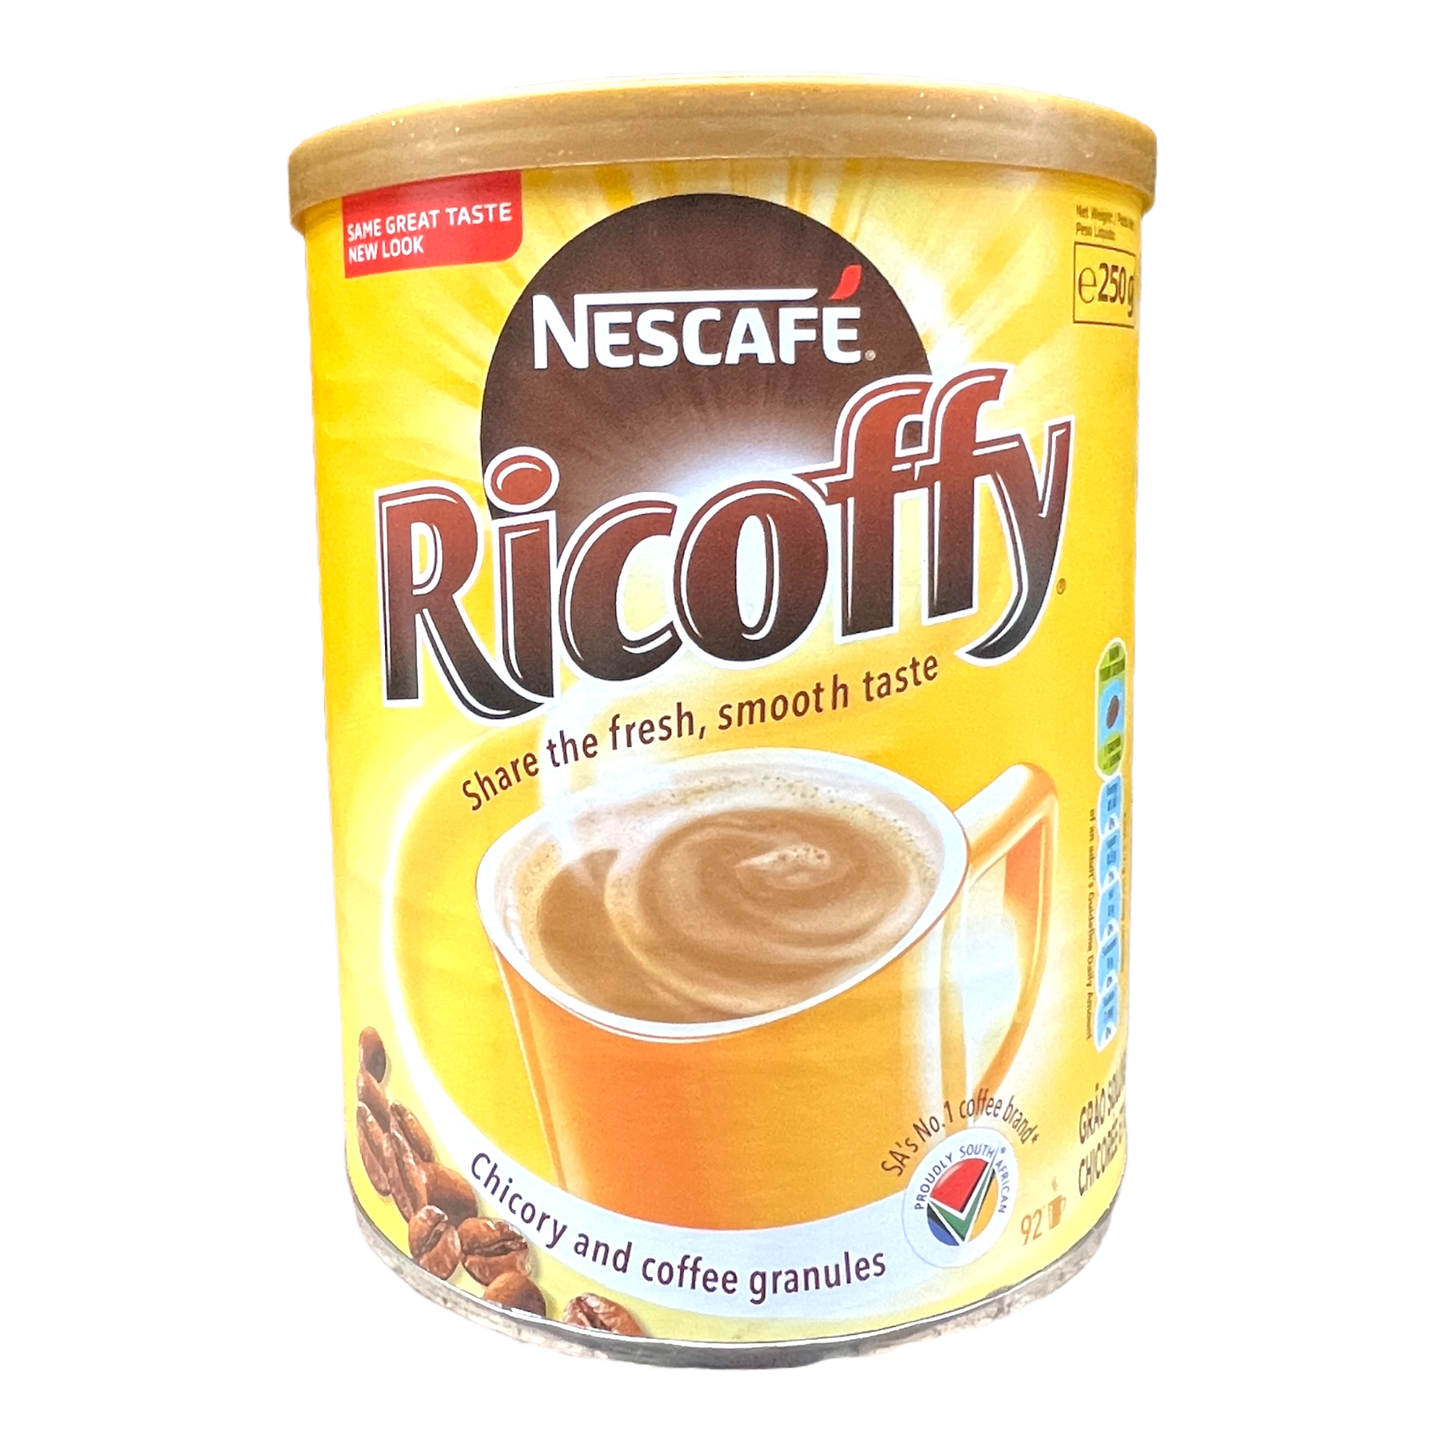 Nescafe Ricoffy Coffee and Chicory Granules 250g [South African]